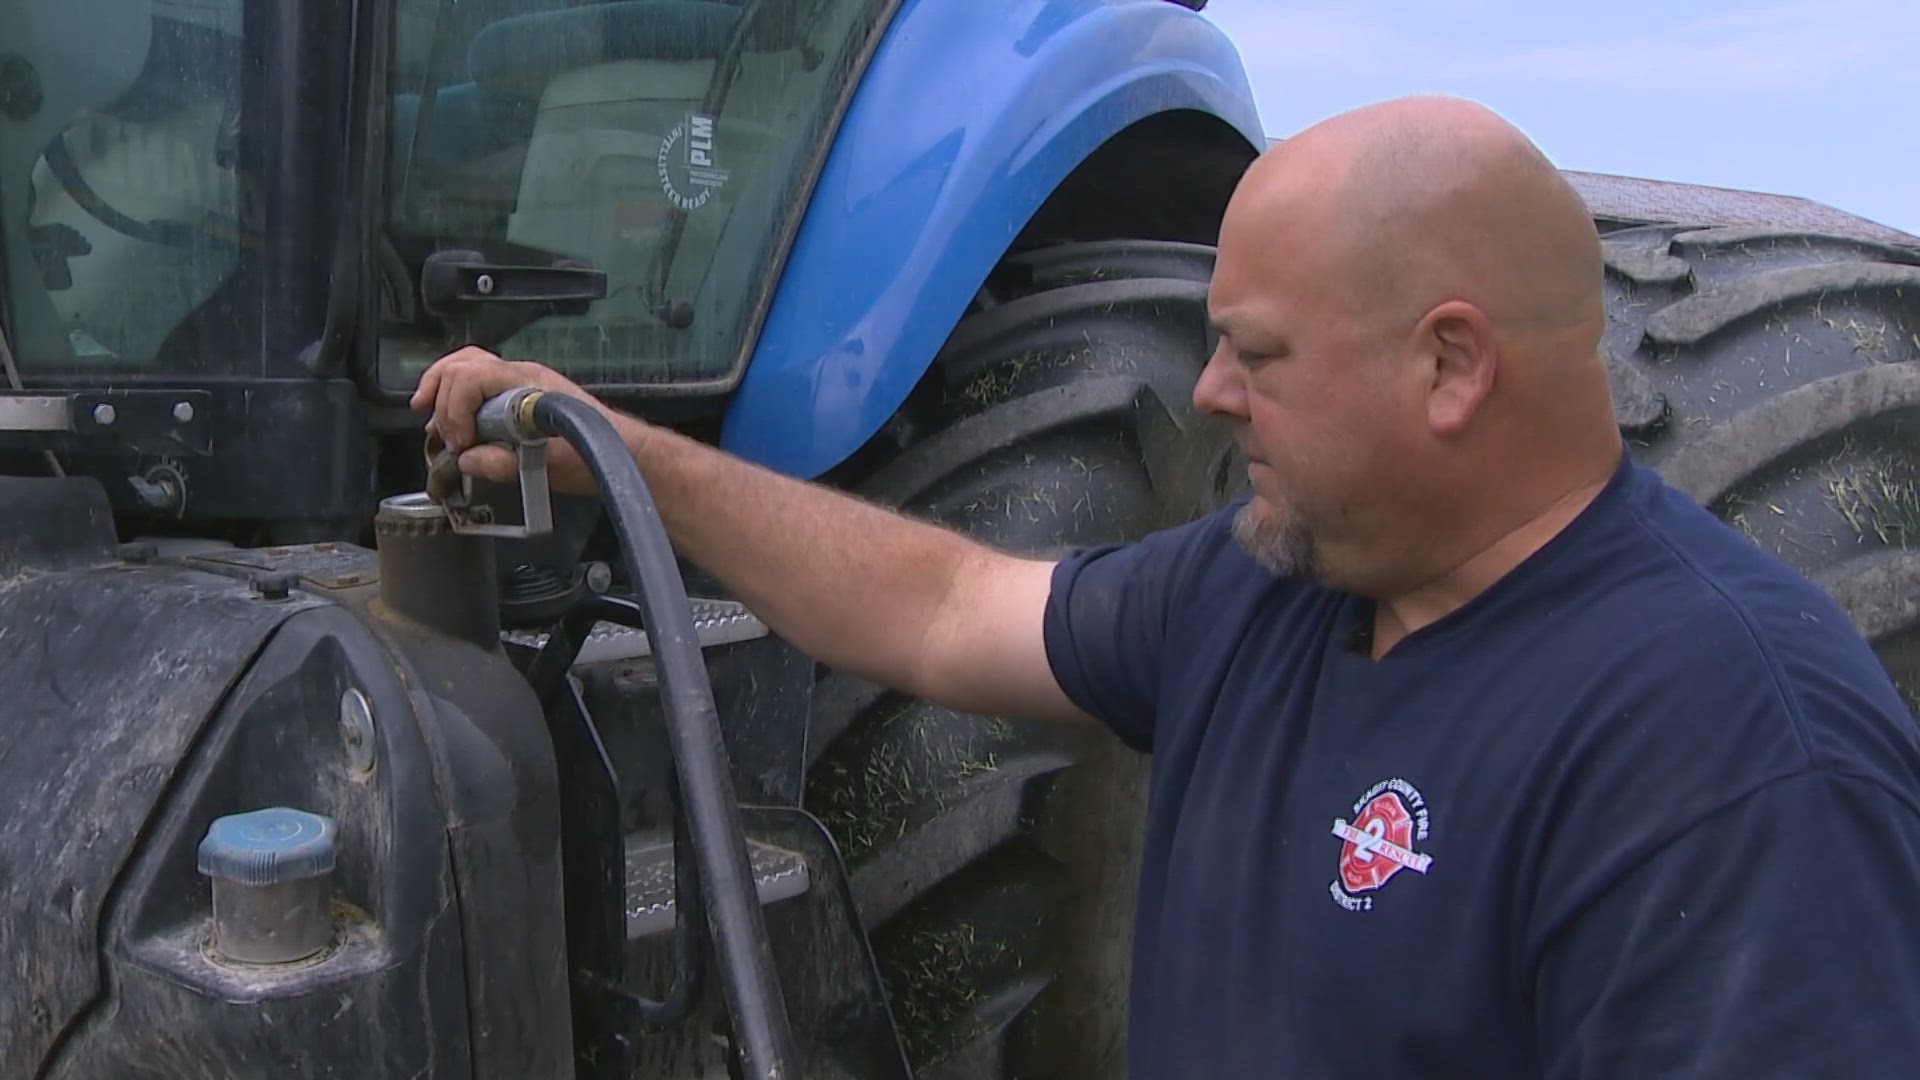 Washington farmers are legally exempt from the fee but many are still being charged.